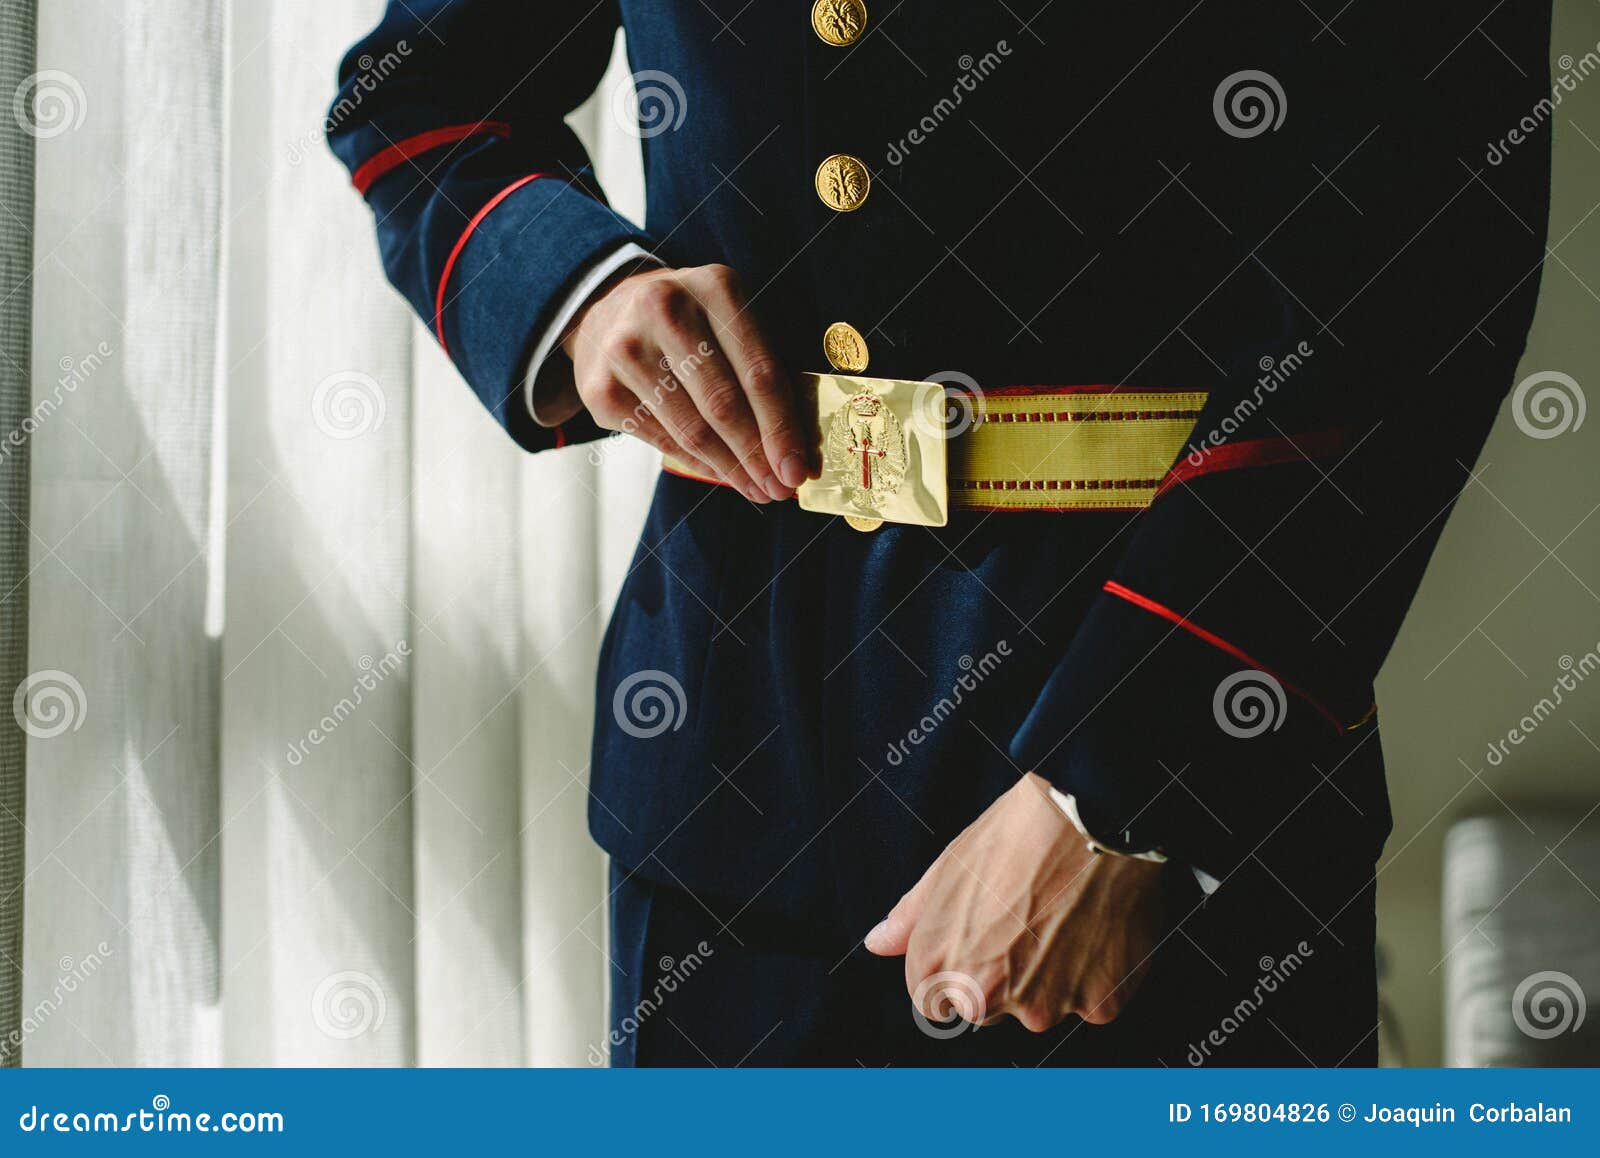 Military Soldier Wearing His Dress Uniform Stock Photo - Image of army ...